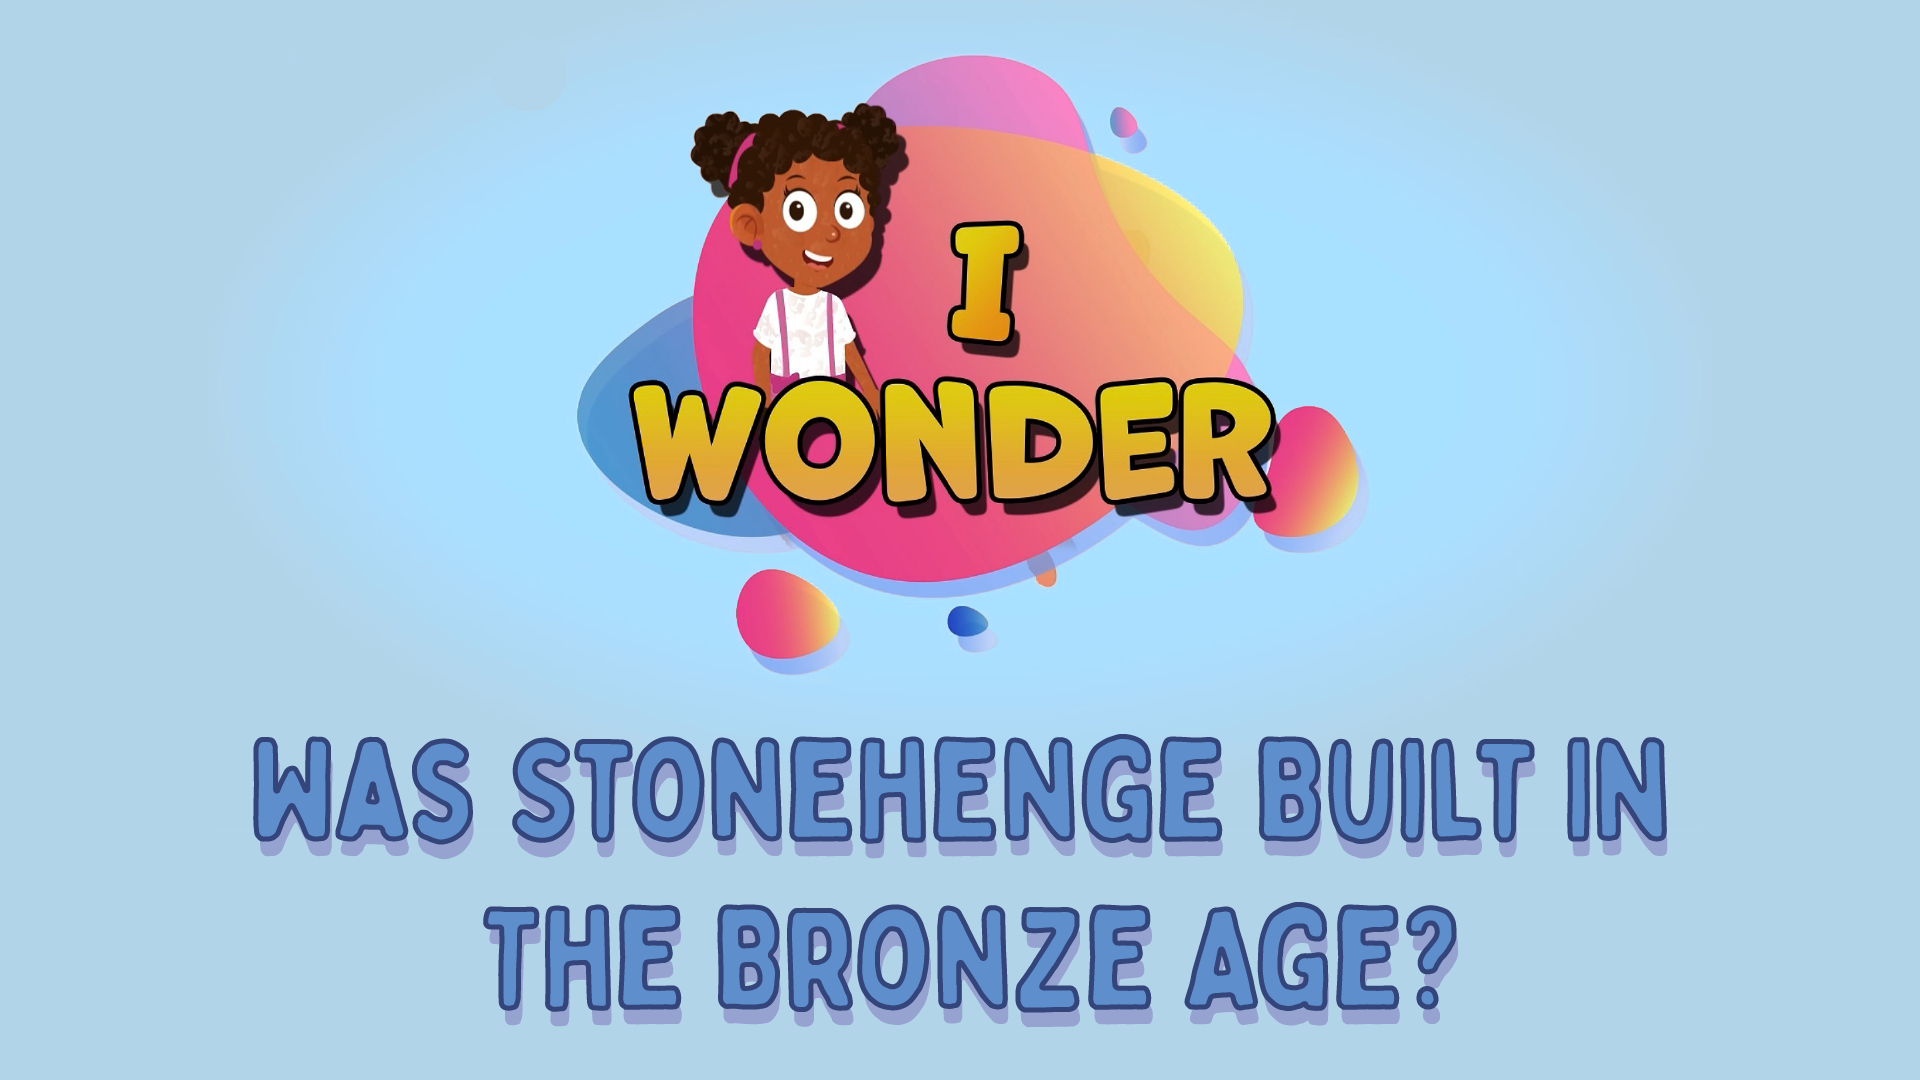 Was Stonehenge Built In The Bronze Age?